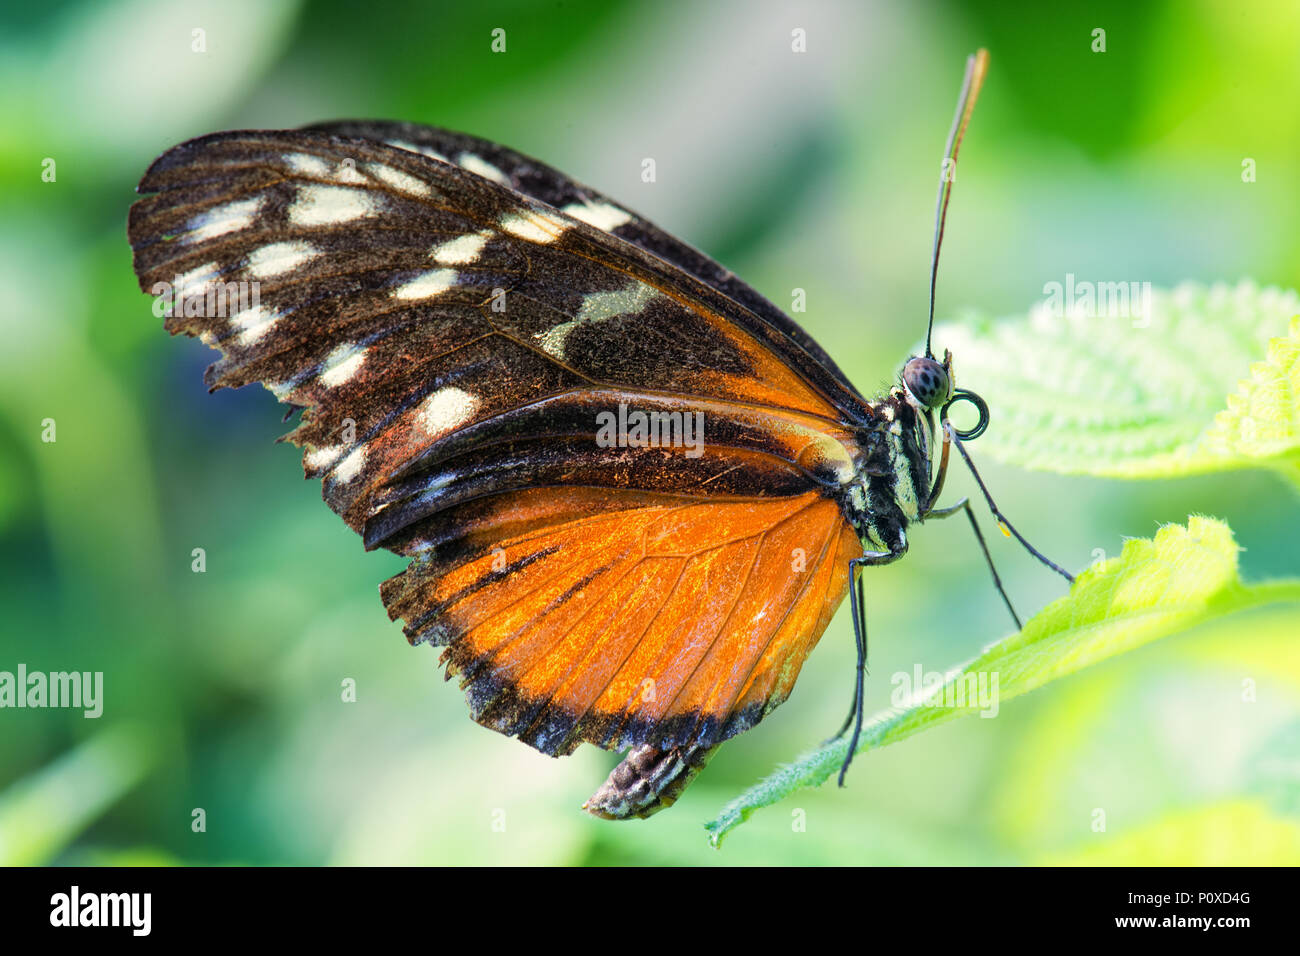 Tiger longwing - Heliconius hecale, beautiful orange butterfly from Central and South America forests. Stock Photo